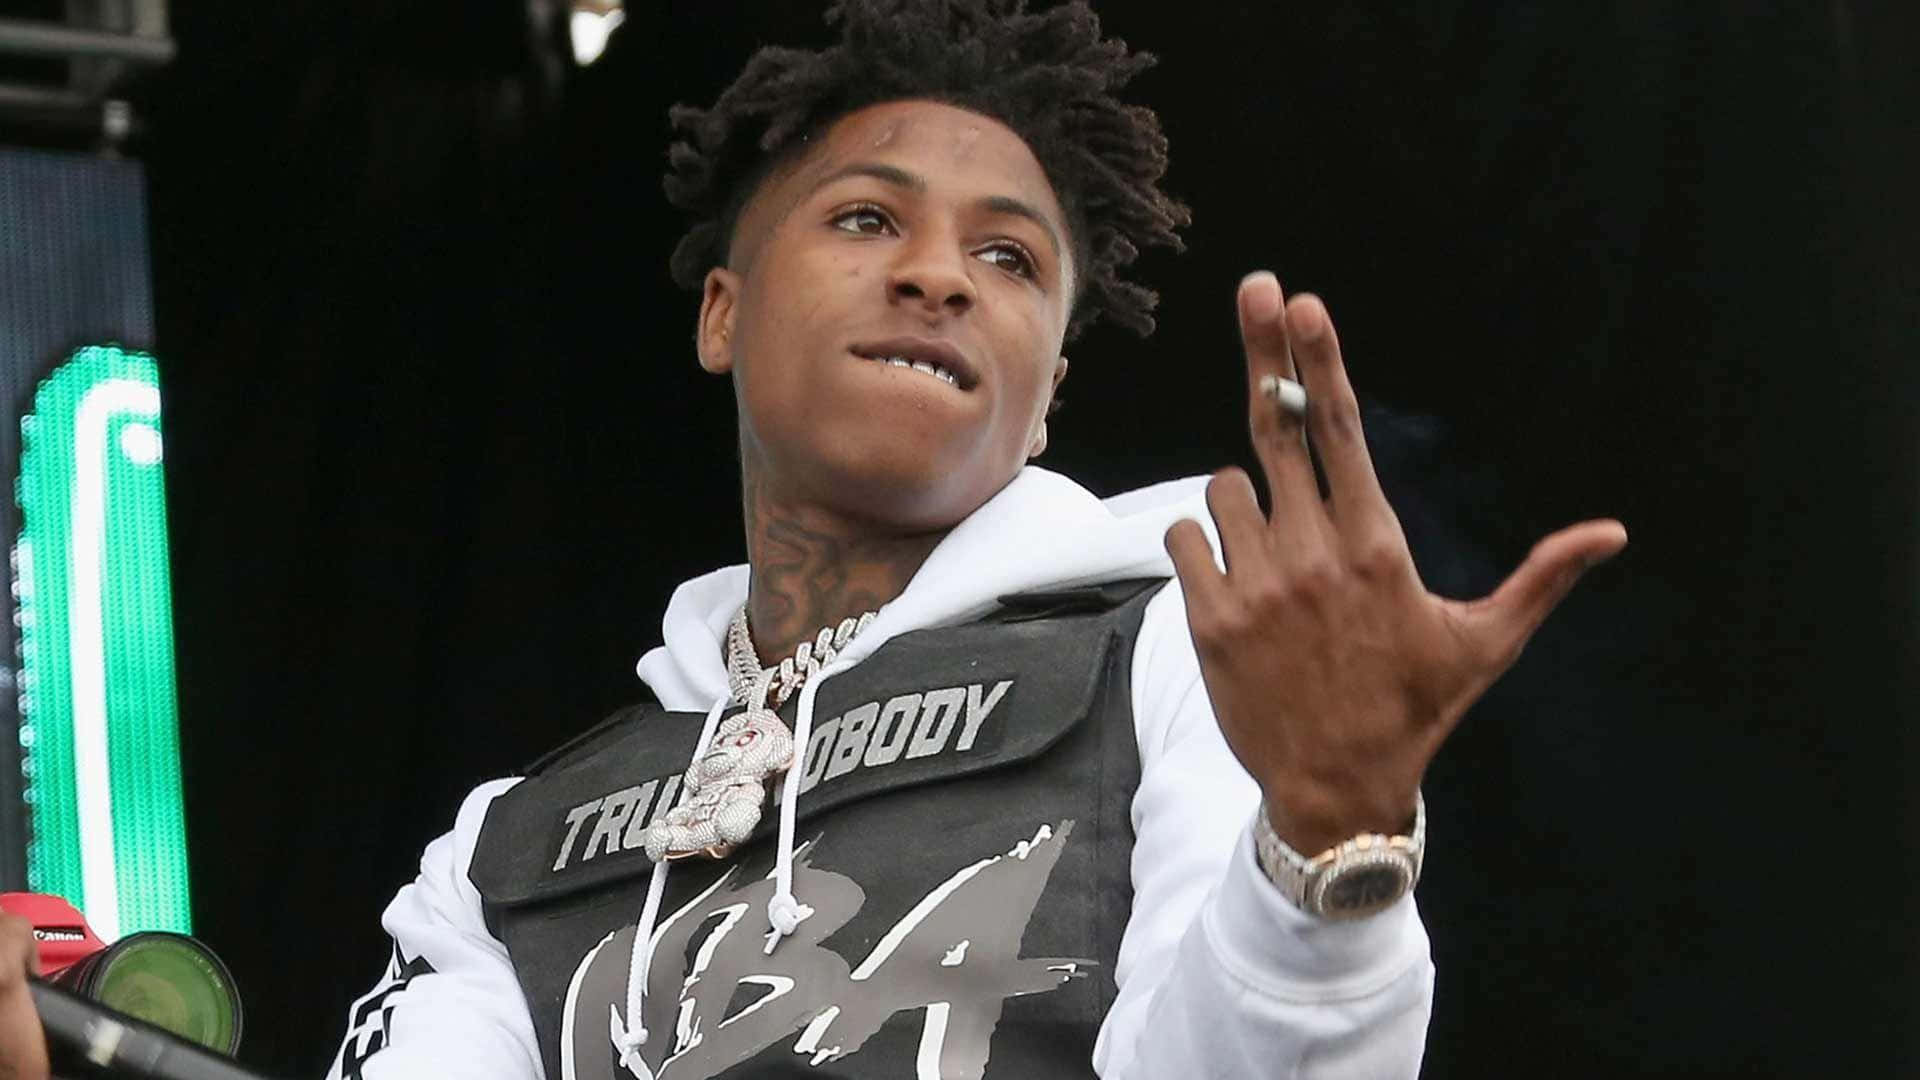 Nba Youngboy showing off his luxurious jewelry look.